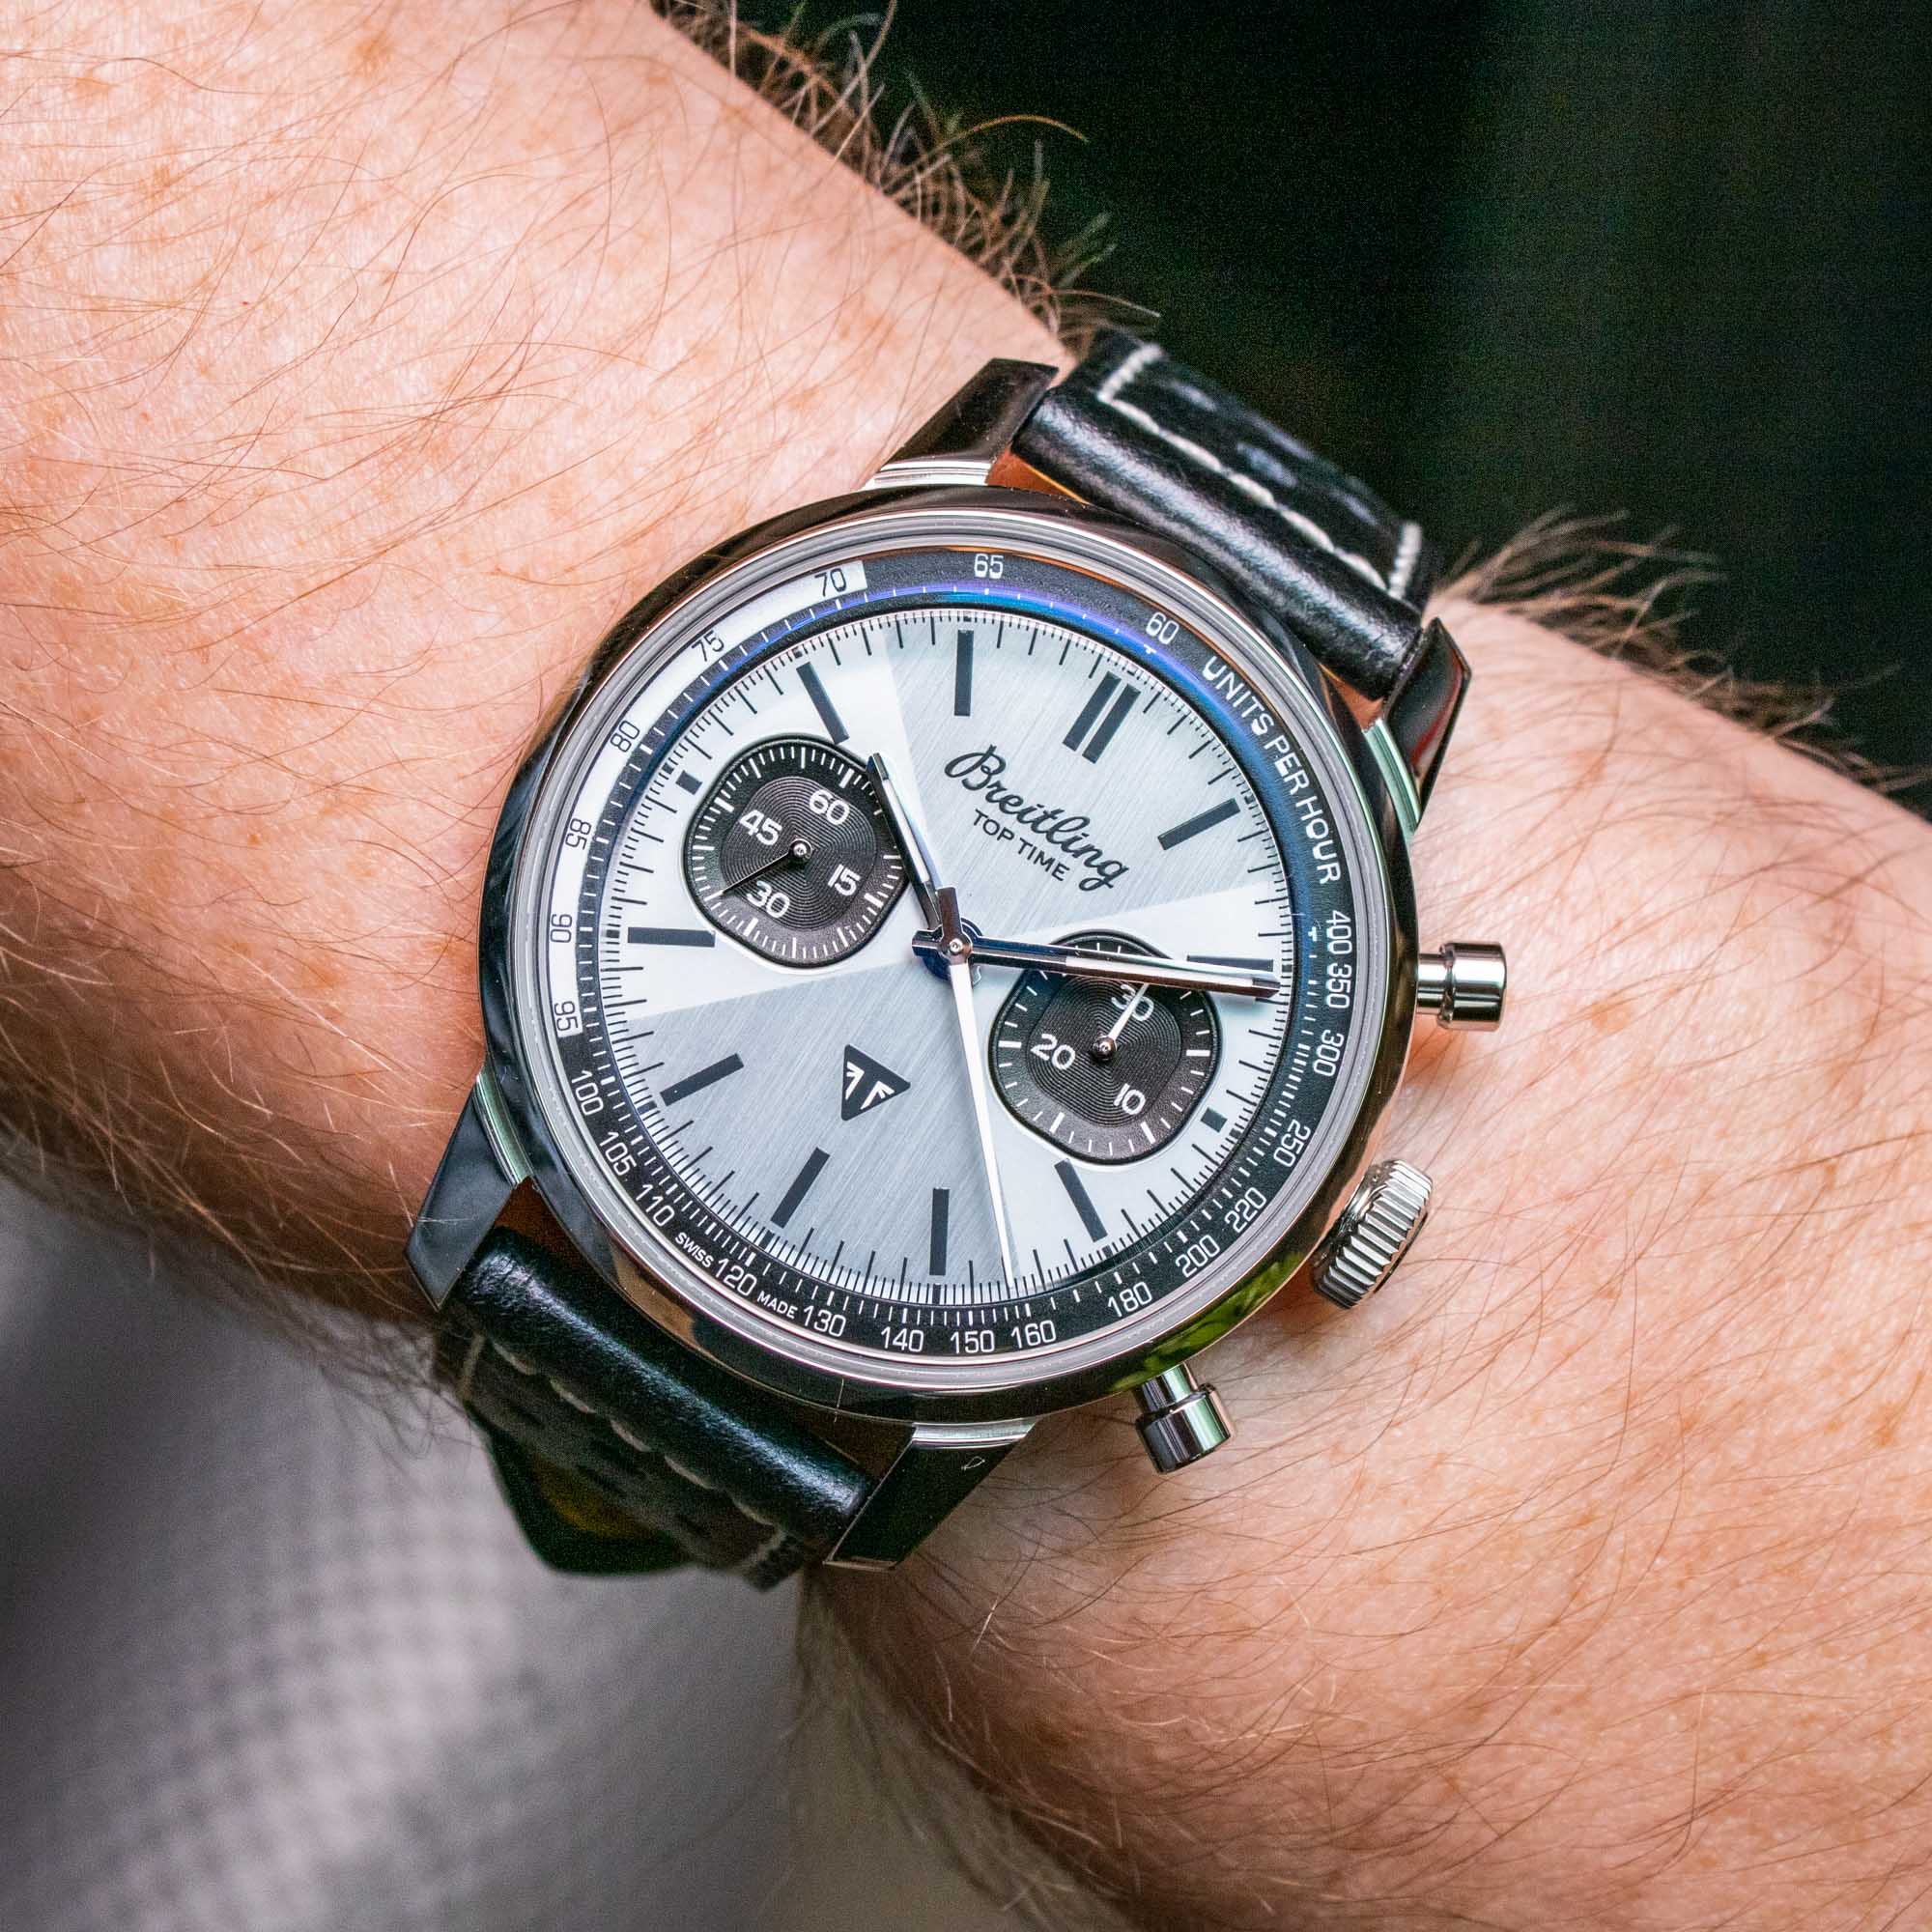 Review of the Breitling x Deus Ex Machina Top Time Limited Edition 2022 